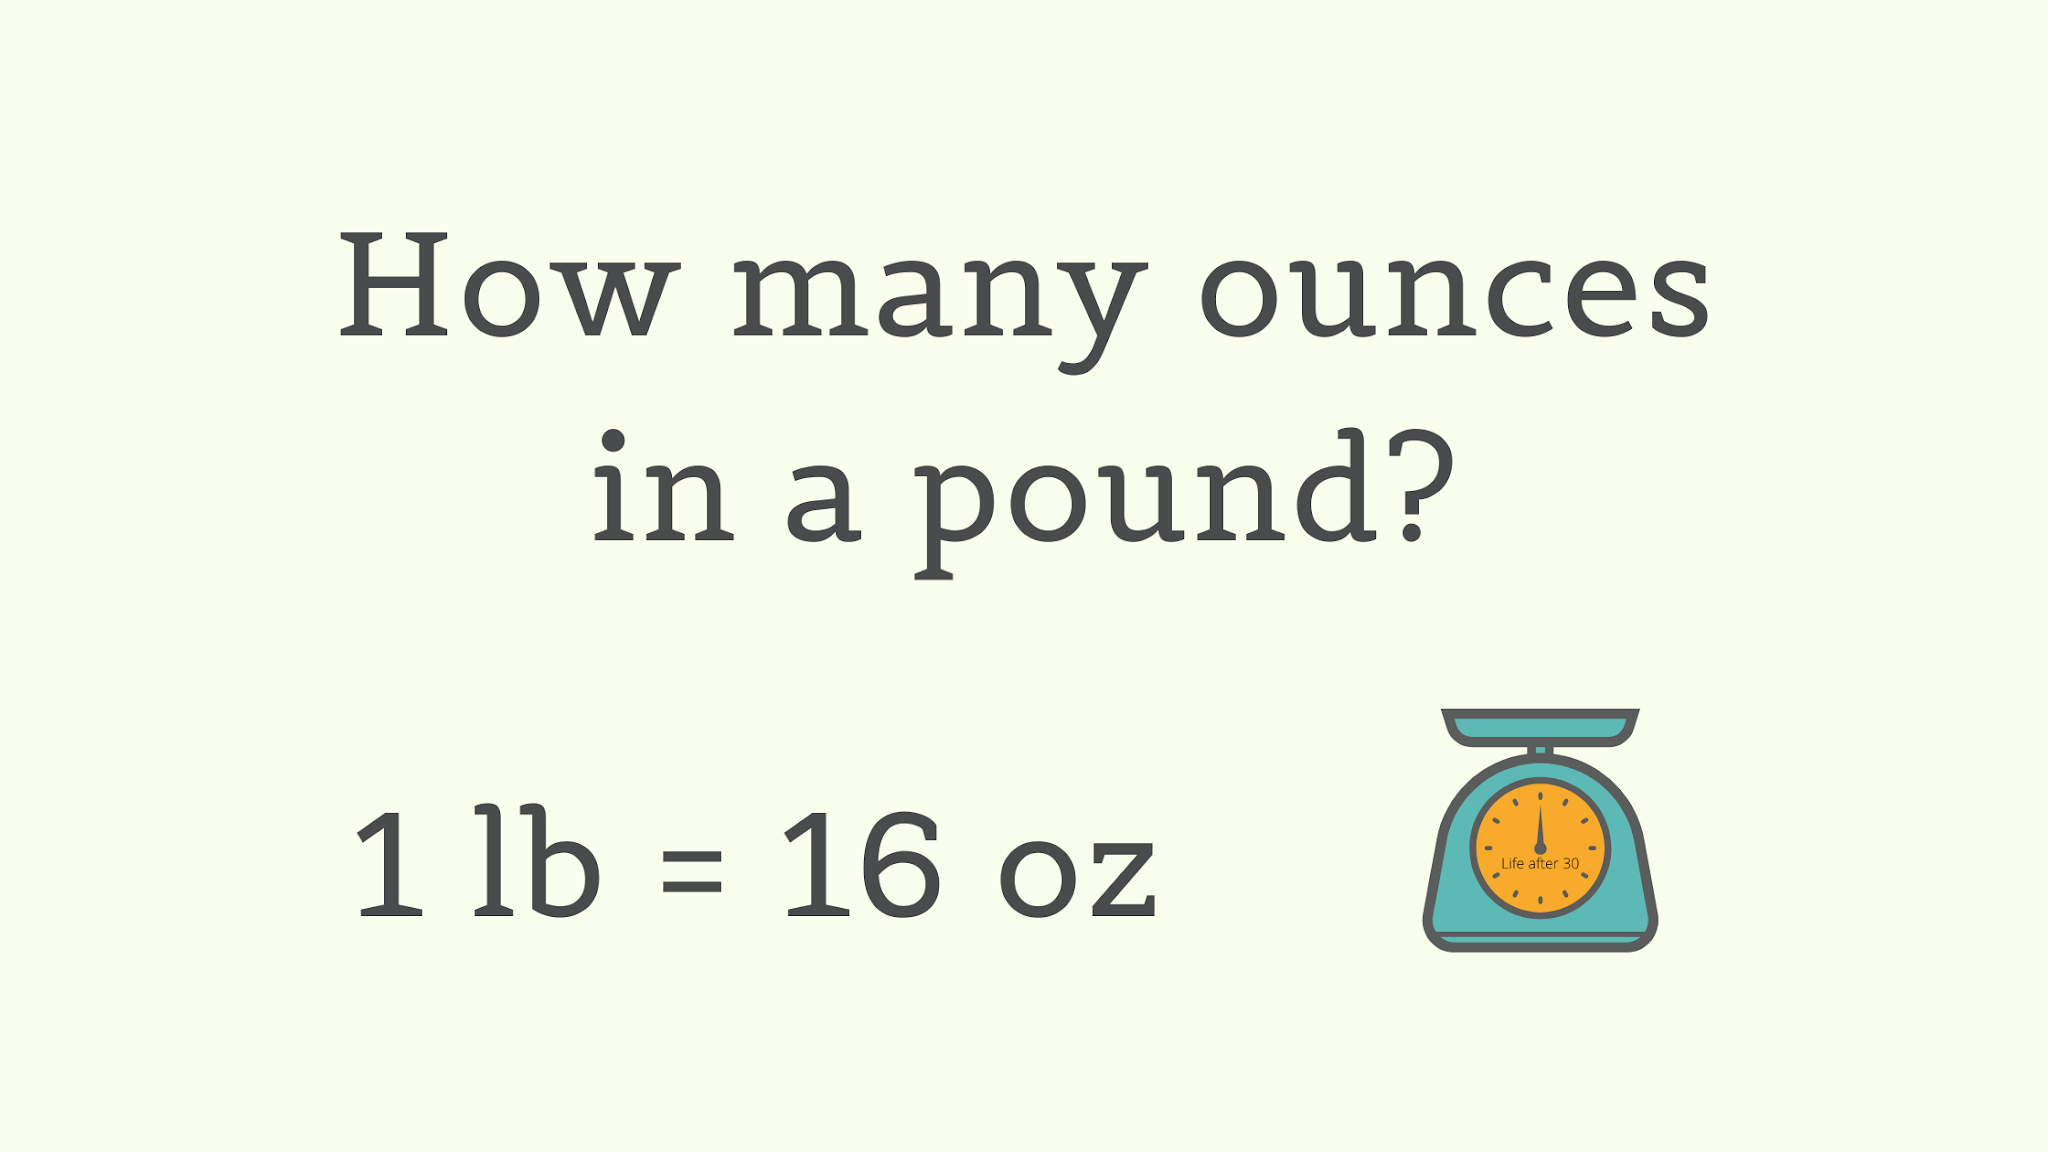 How Many Ounces in a Pound?